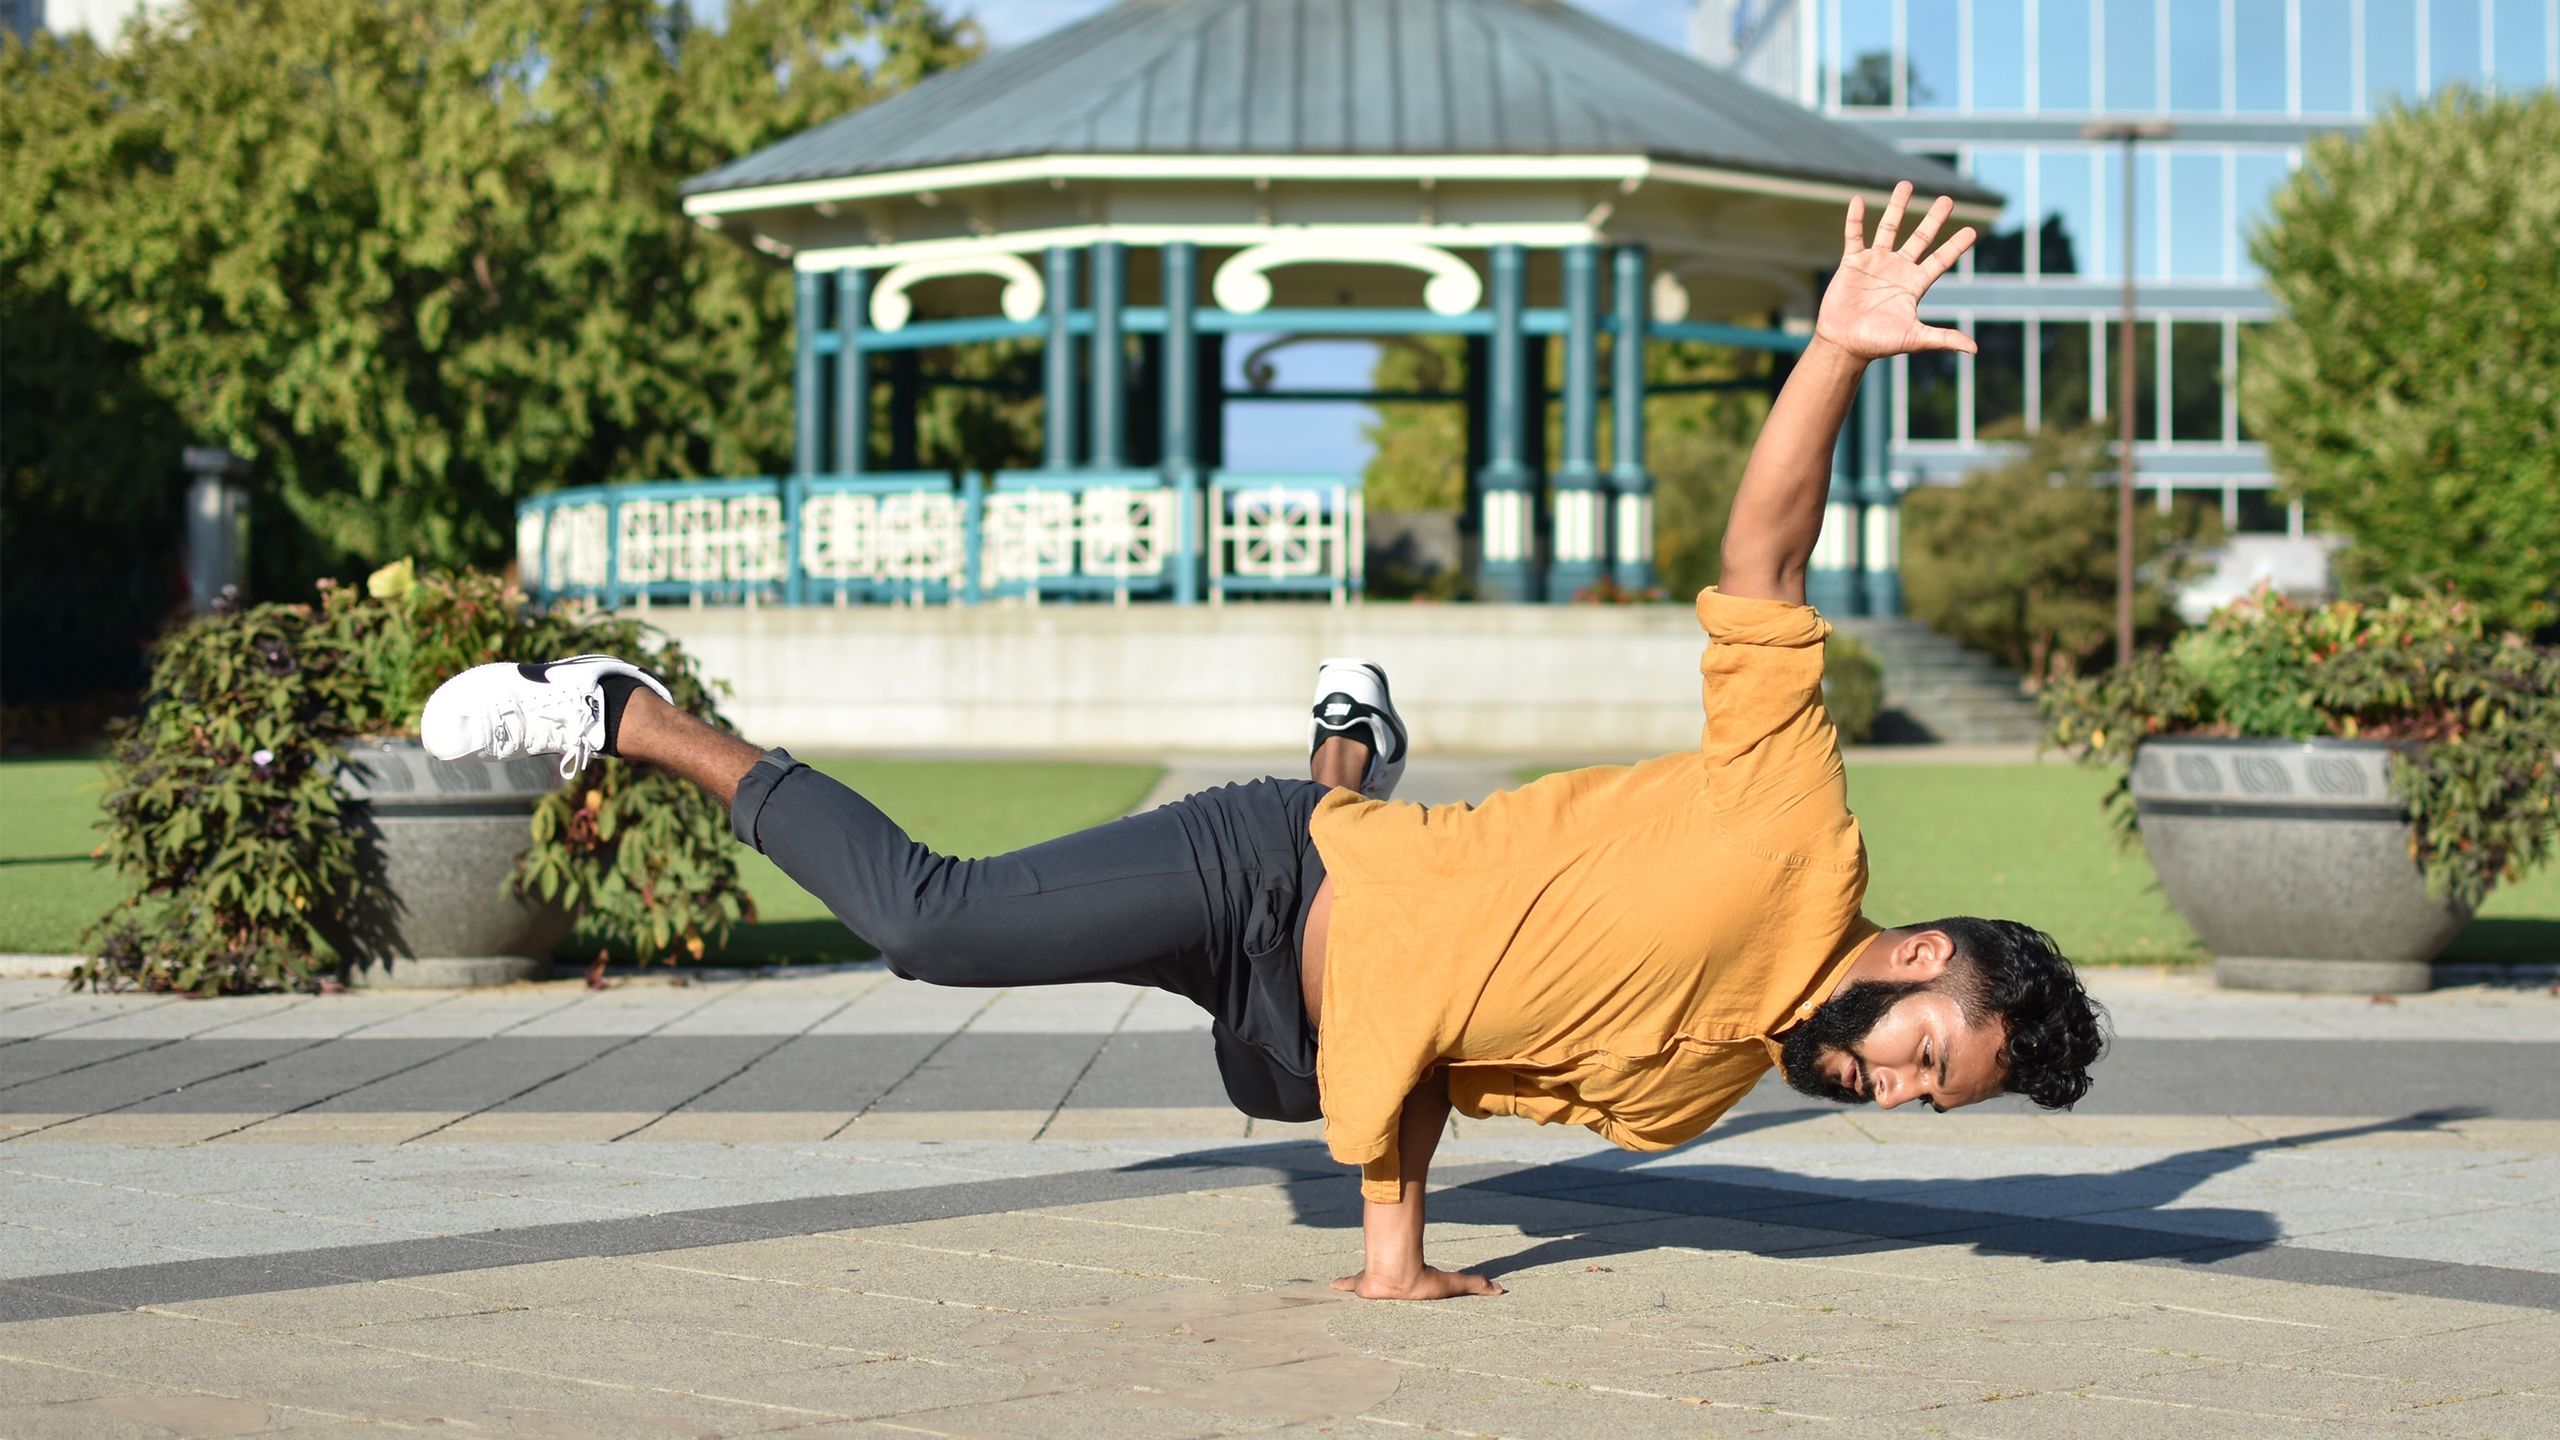 Julio Medina performs a dance move where he balances on one hand, holding his body parallel to the ground.